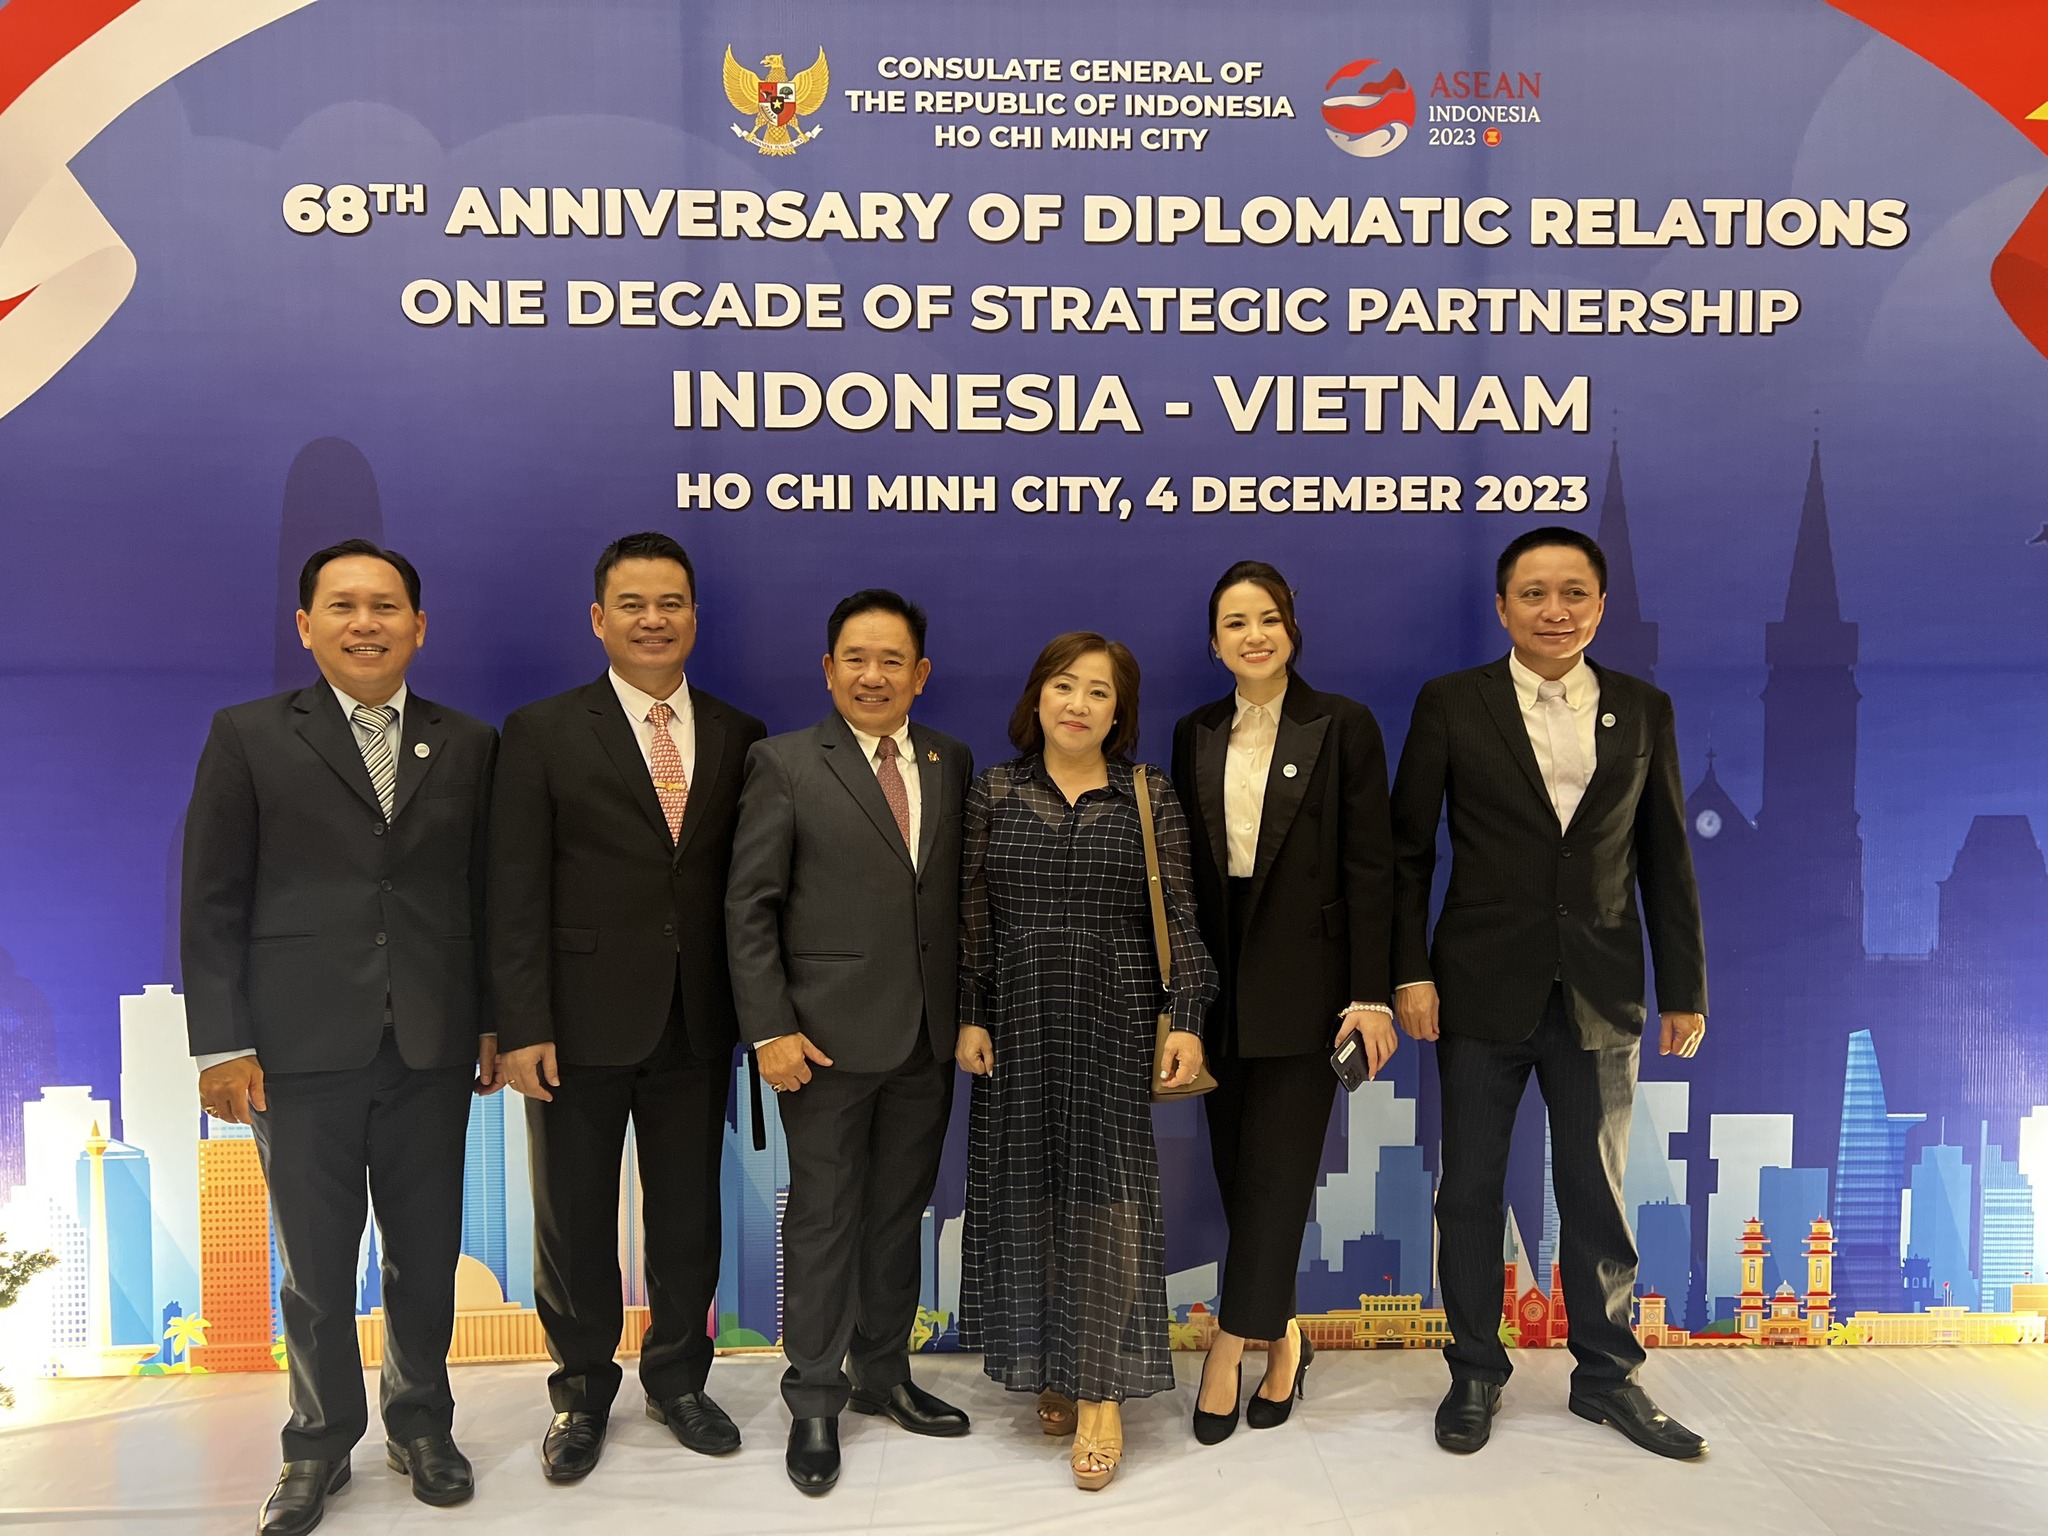 May be an image of 6 people, suit, dais and text that says 'INDONESIA 2023 CONSULATE GENERAL OF THE REPUBLIC INDONESIA CHI MINH CITY 68TH ANNIVERSARY OF DIPLOMATIC RELATIONS ONE DECADE OF STRATEGIC PARTNERSHIP INDONESIA VIETNAM Ho CHI MINH CITY, 4 DECEMBER 2023 កក'